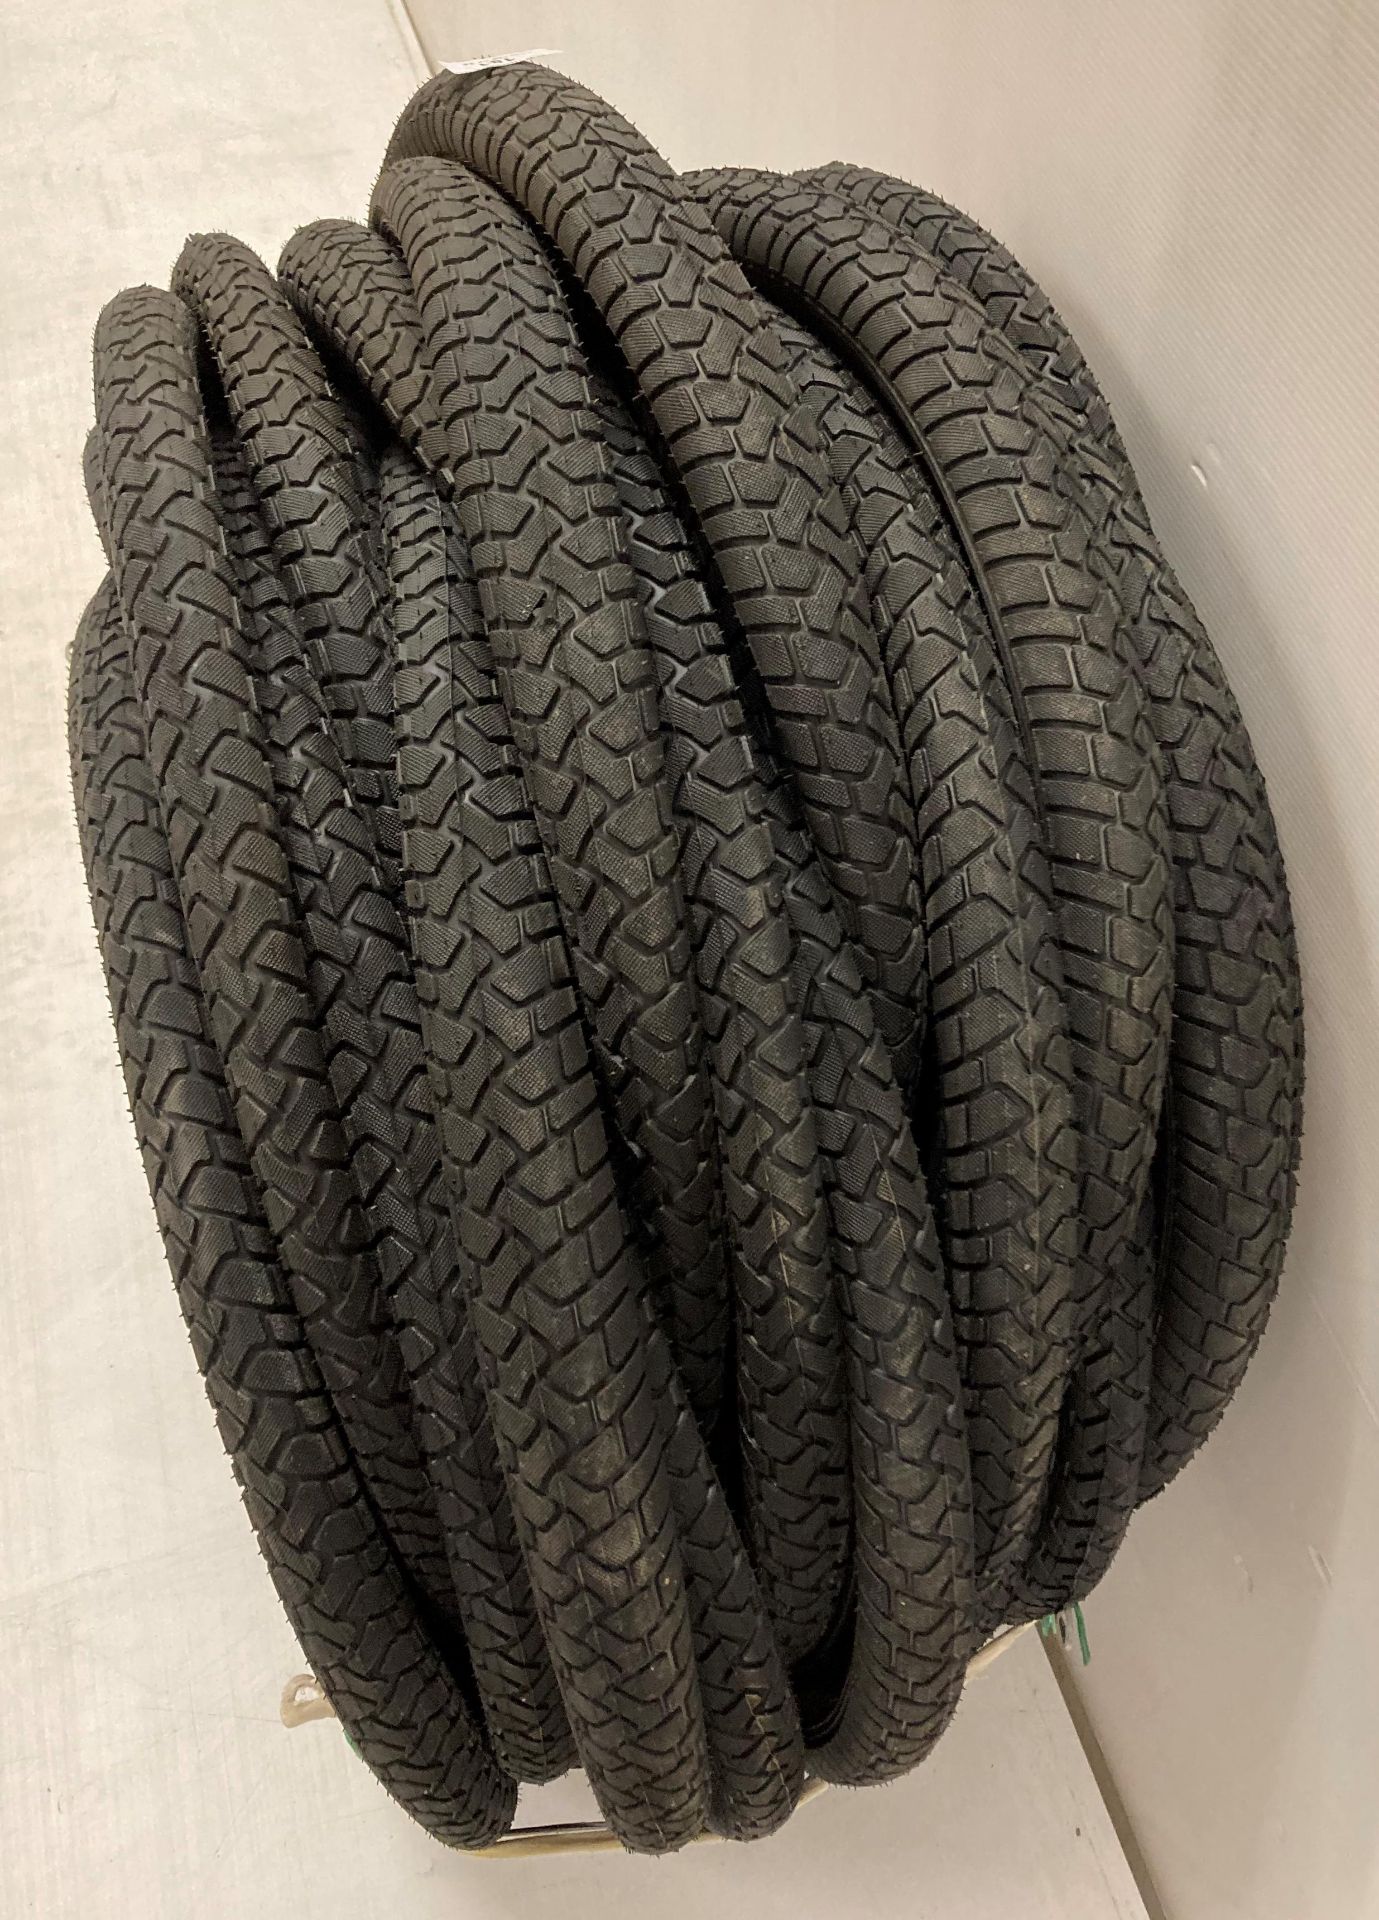 Approximately 30 x Meghna cycle tyres 54/406 (20 x 200) (saleroom location: M06) - Image 2 of 2